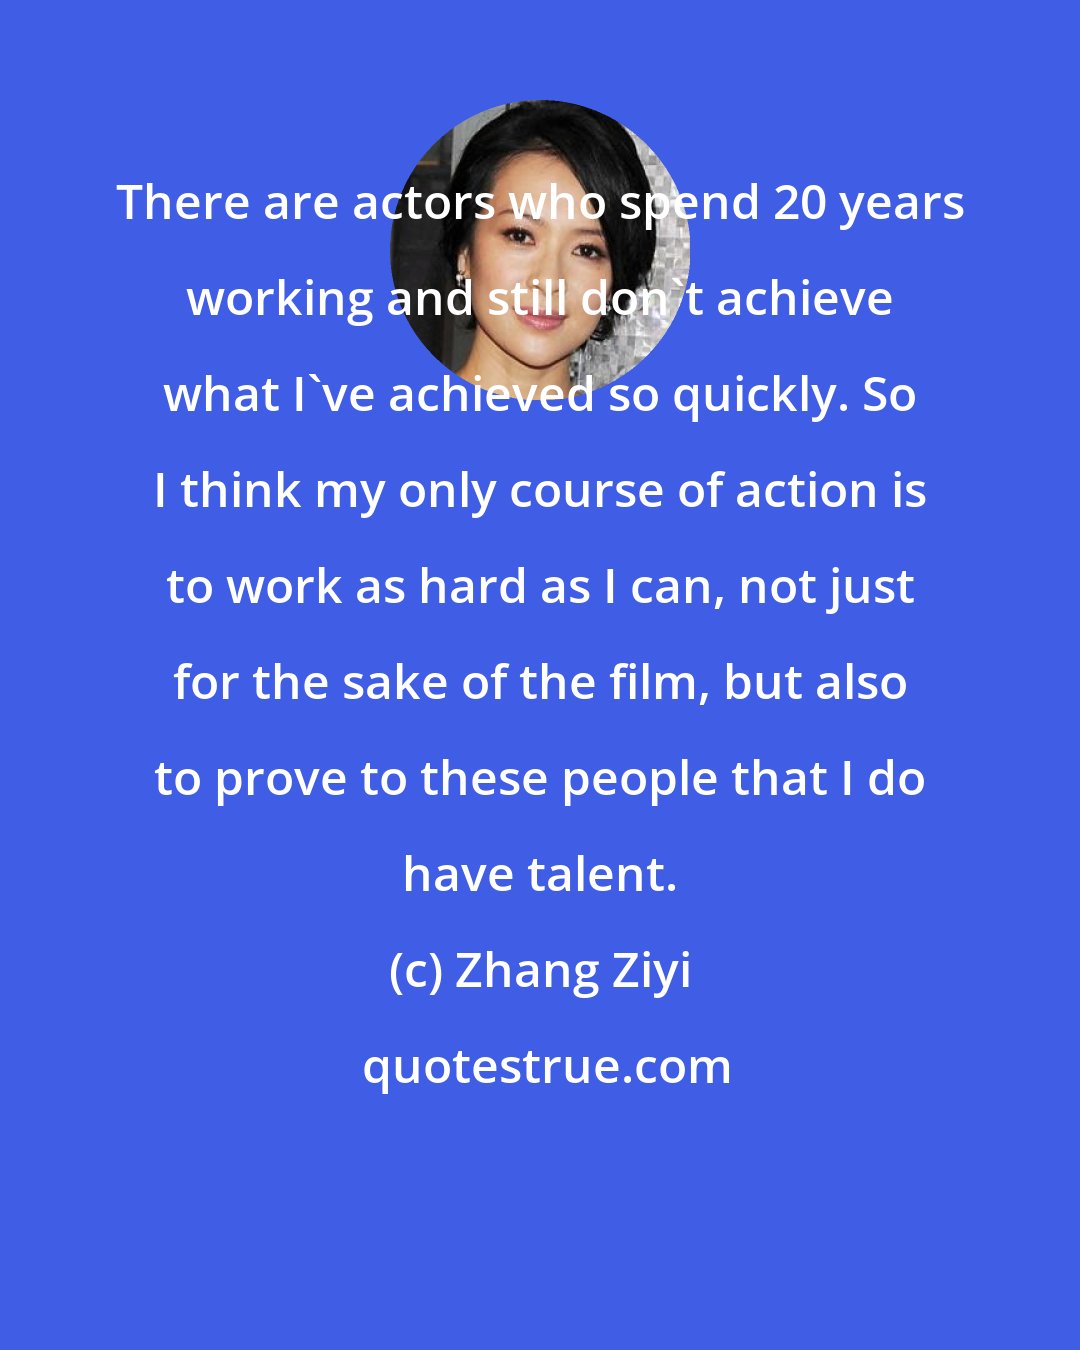 Zhang Ziyi: There are actors who spend 20 years working and still don't achieve what I've achieved so quickly. So I think my only course of action is to work as hard as I can, not just for the sake of the film, but also to prove to these people that I do have talent.